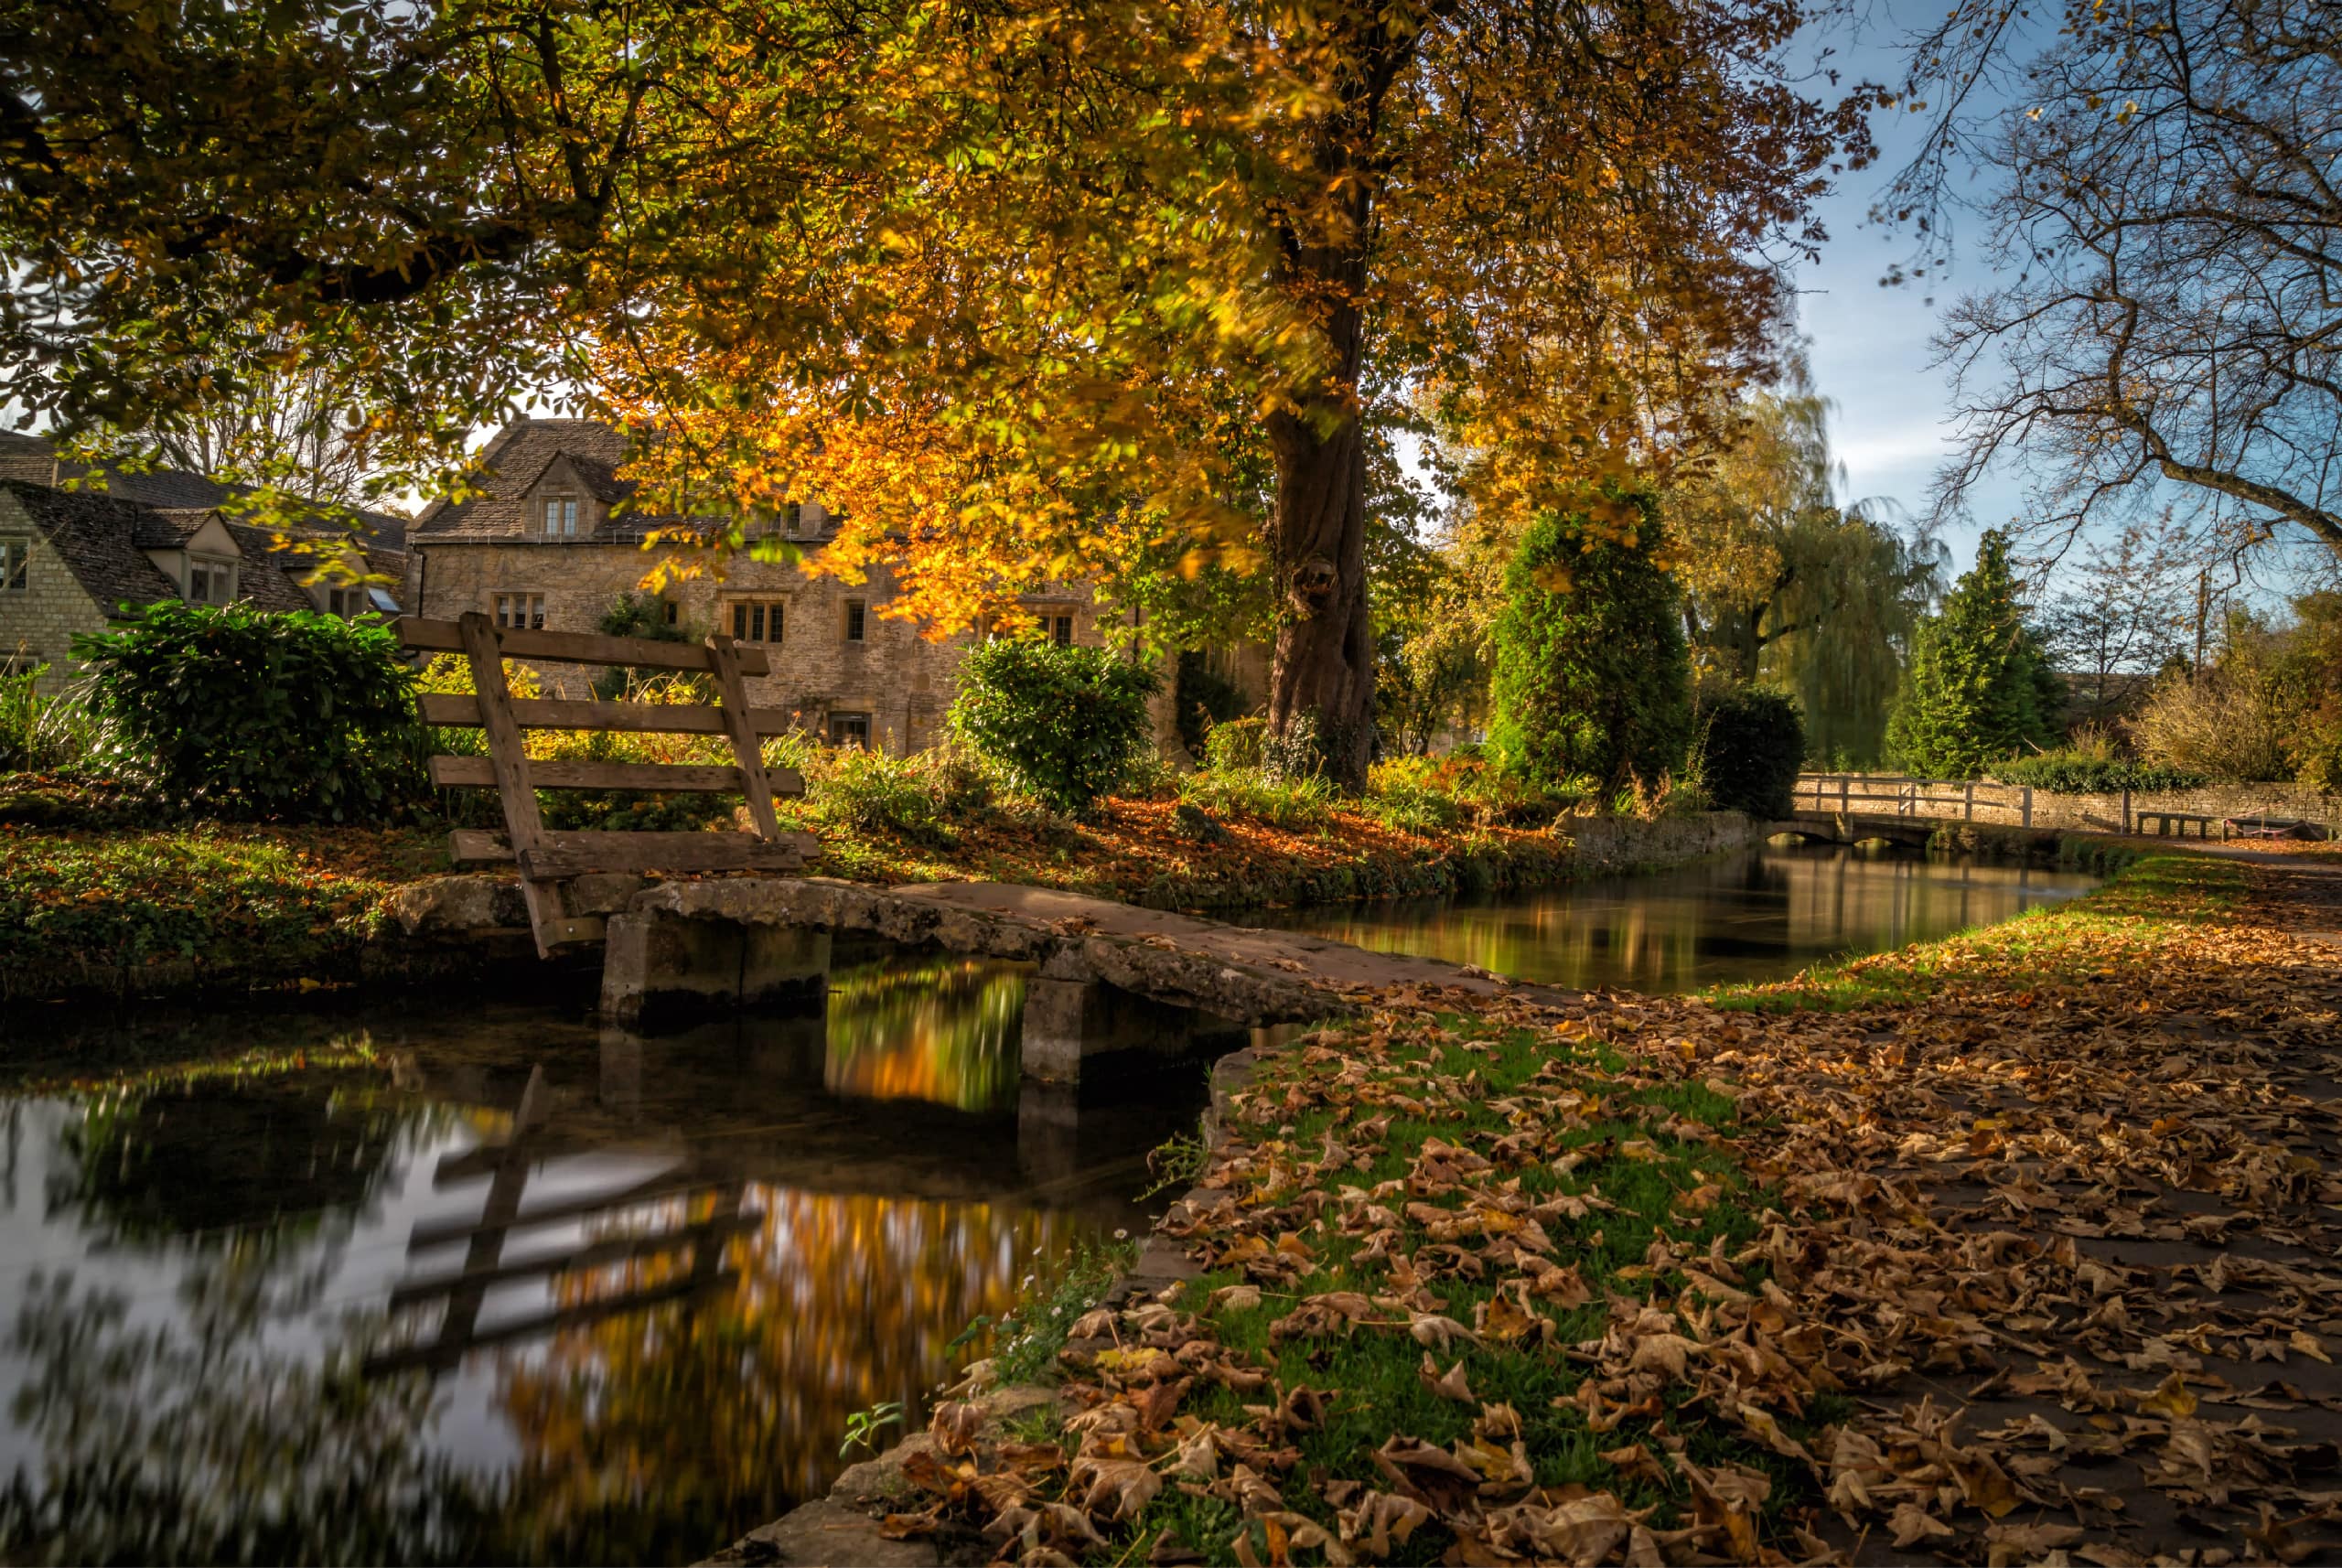 An autumn scene in the Cotswolds